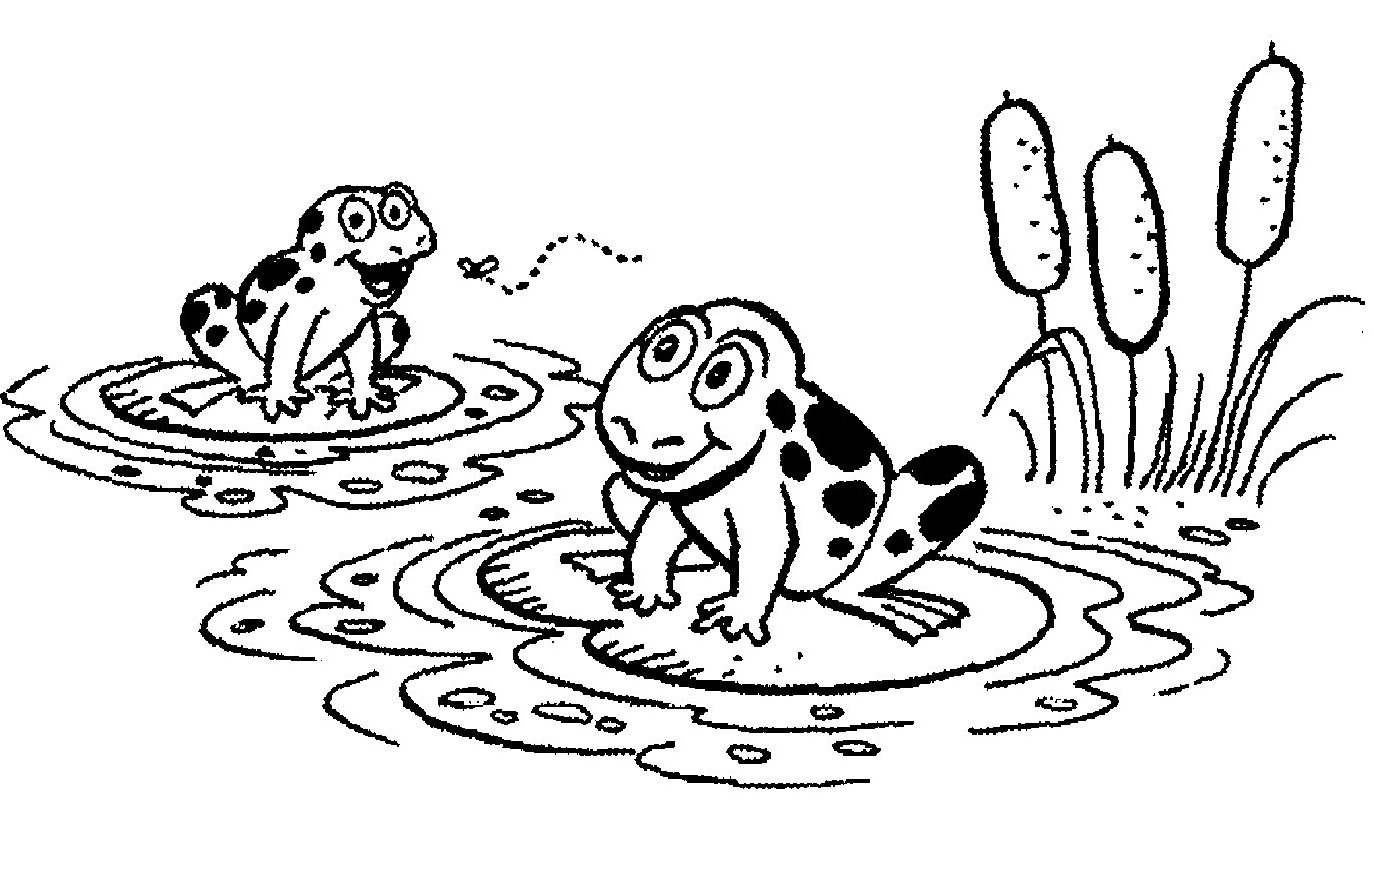 Pond black and white clipart